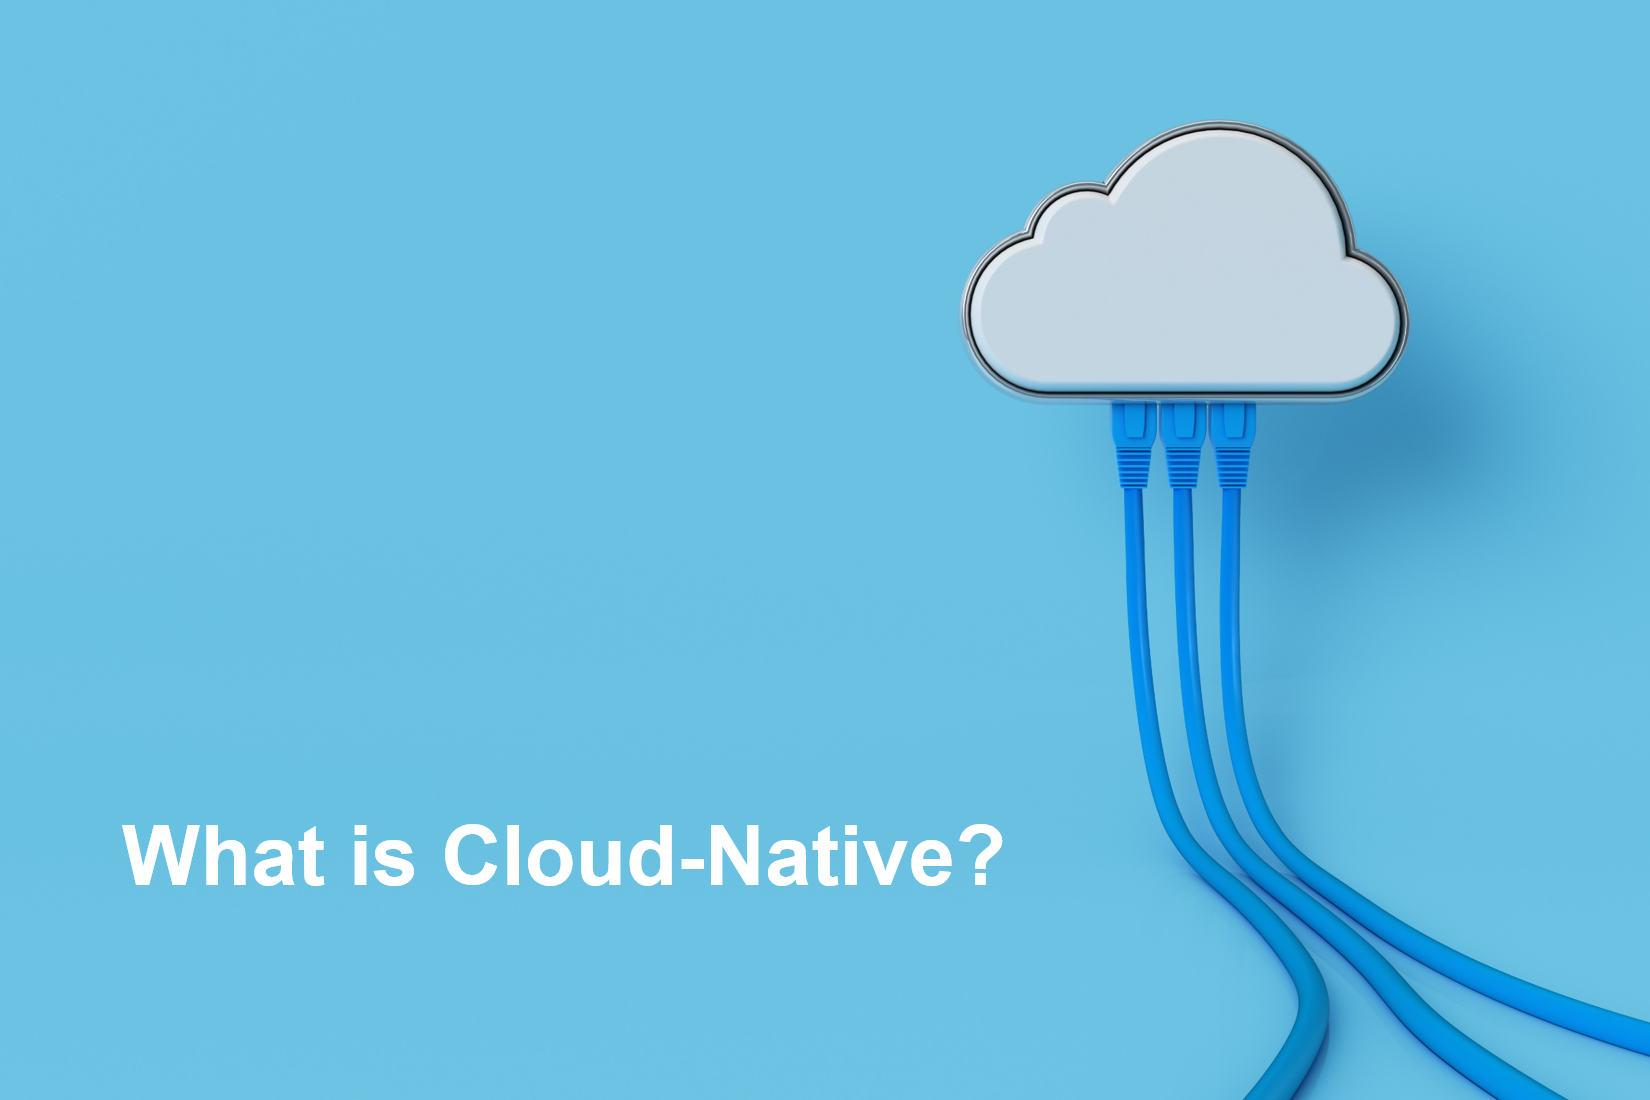 What is cloud native